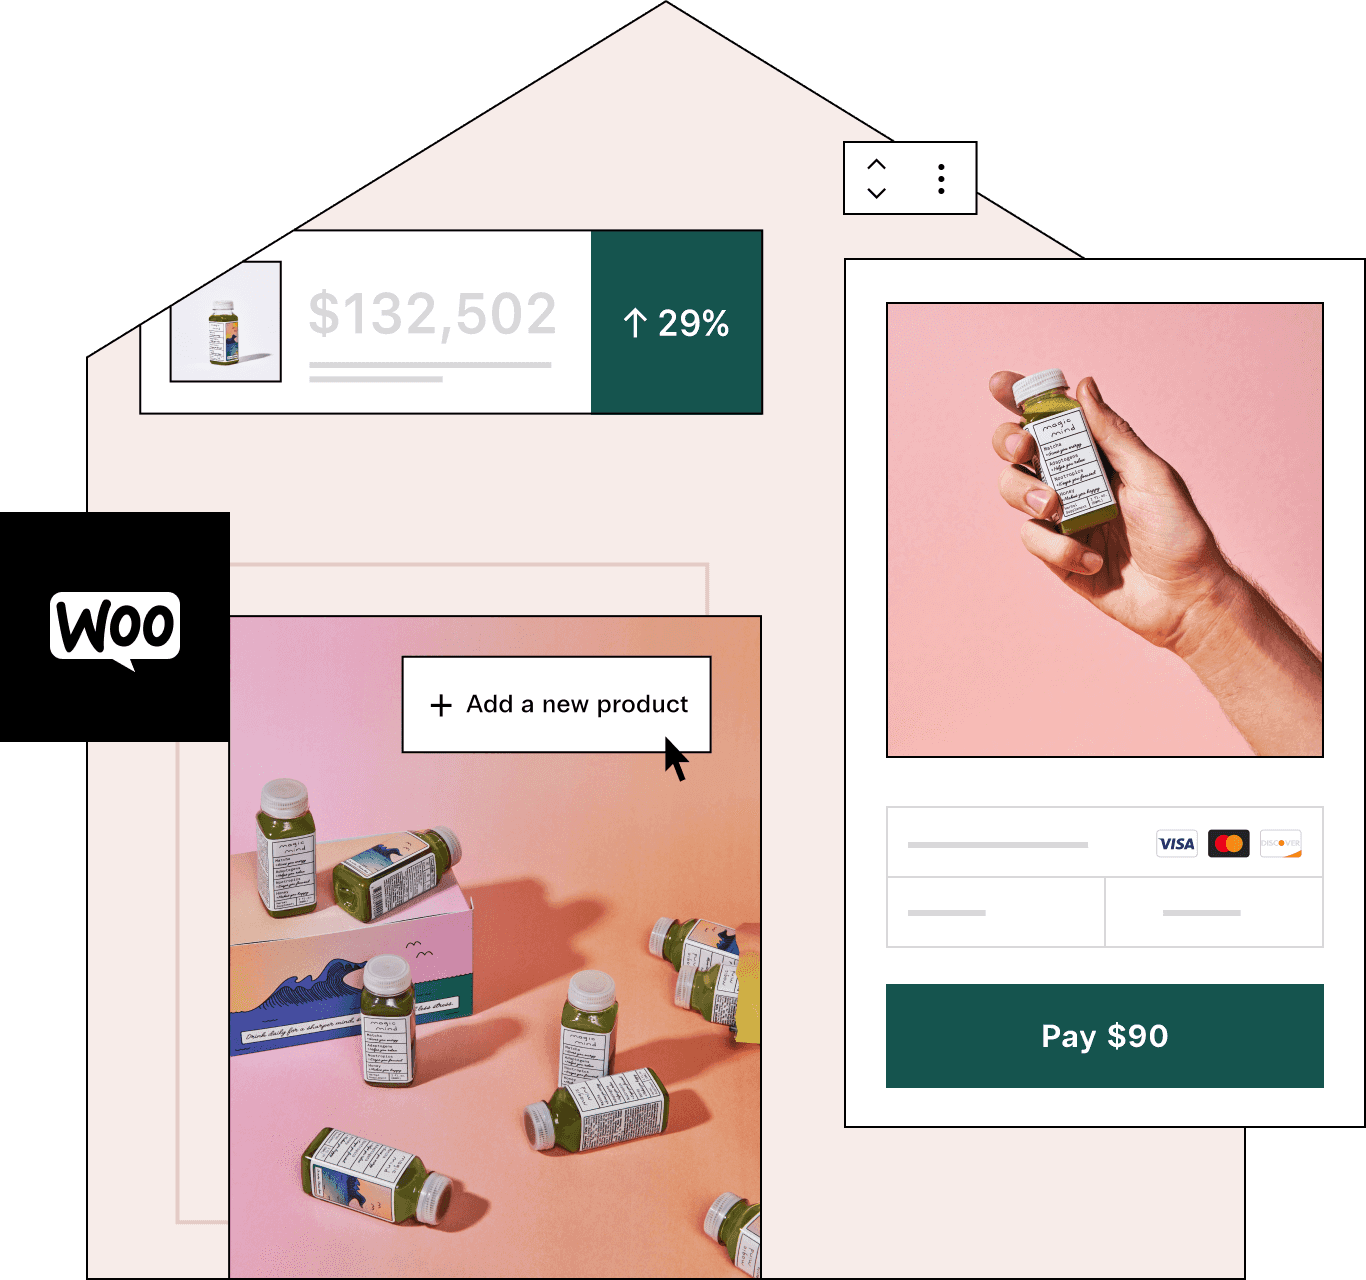 A WooCommerce store that sells supplement drinks. Within the shape of a house, examples of checkout, add a new product, and $132,502 in revenue